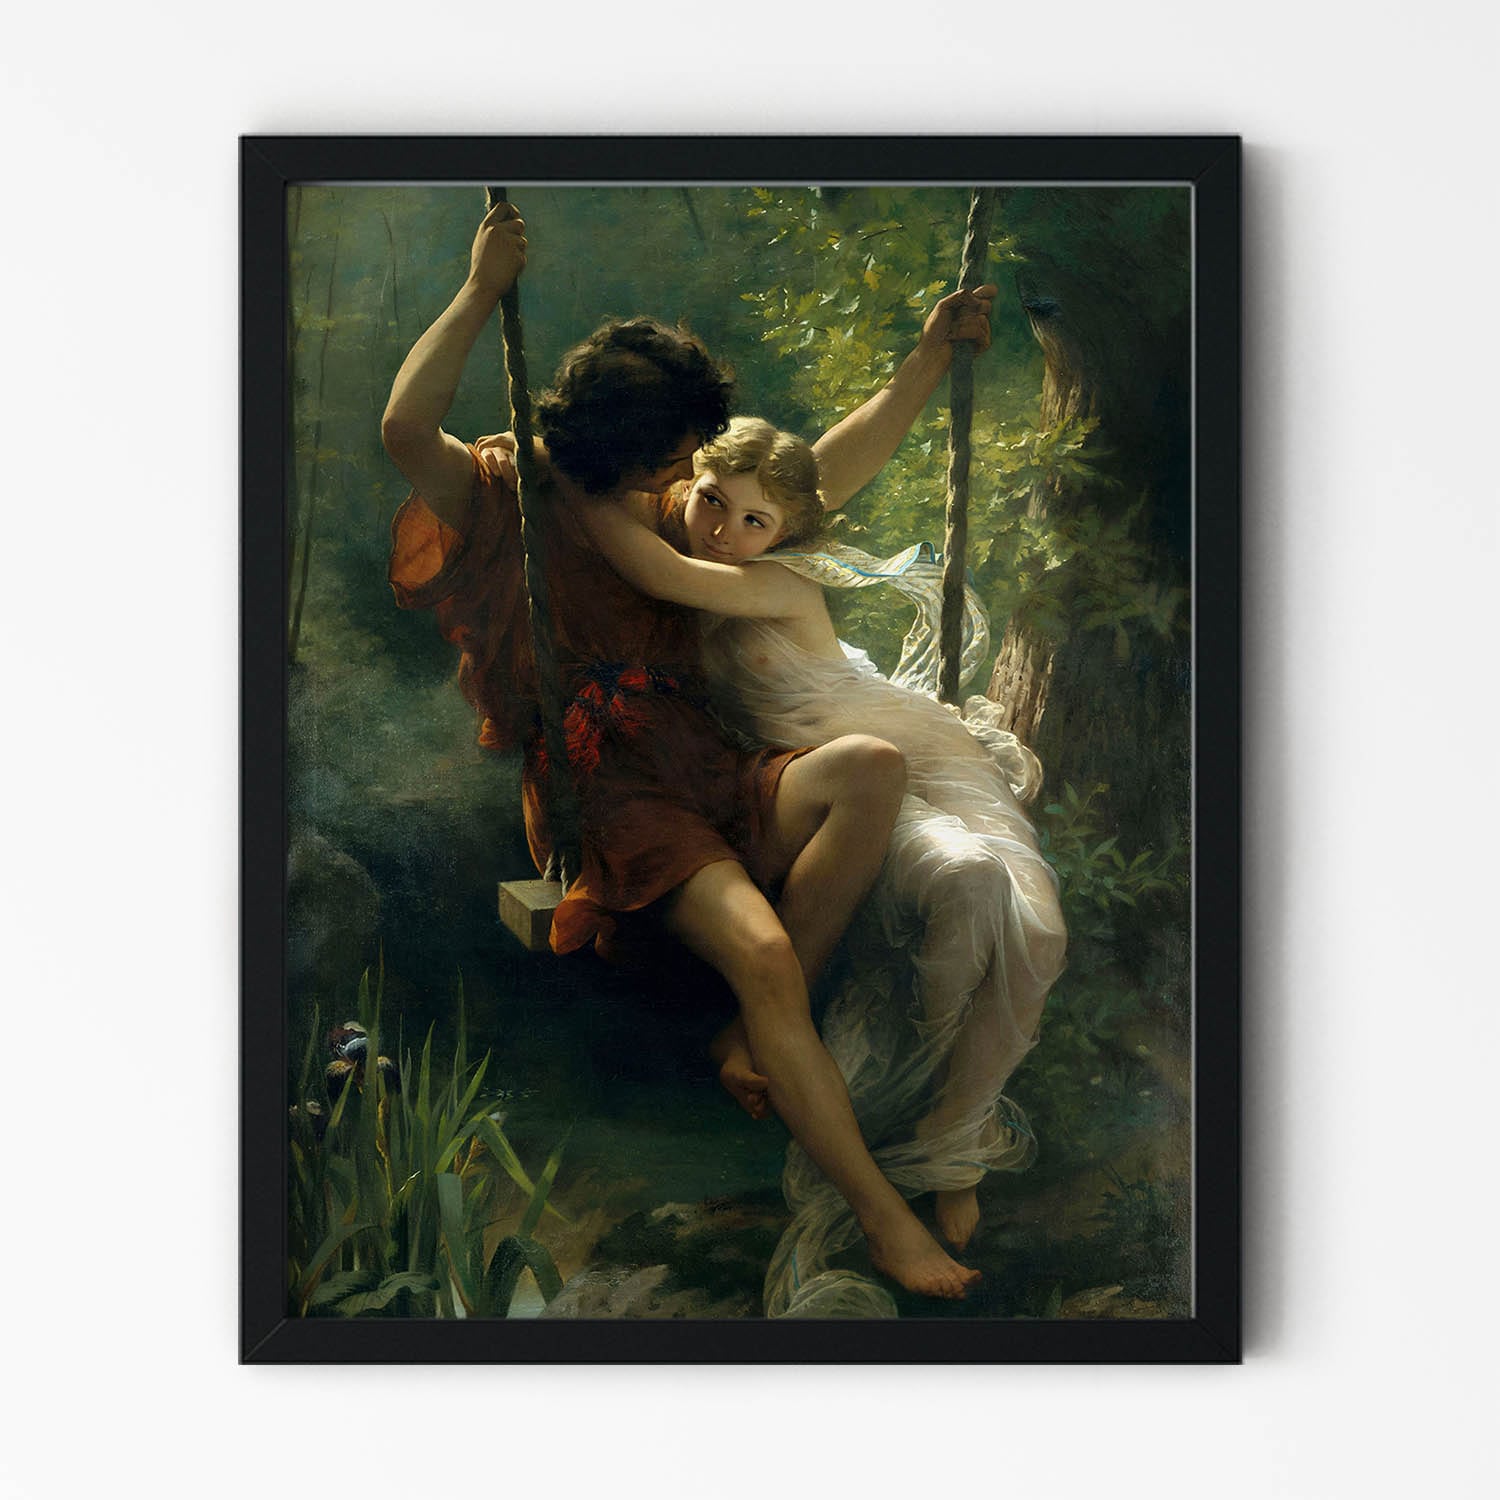 Lovers on a Swing Art Print in Black Picture Frame